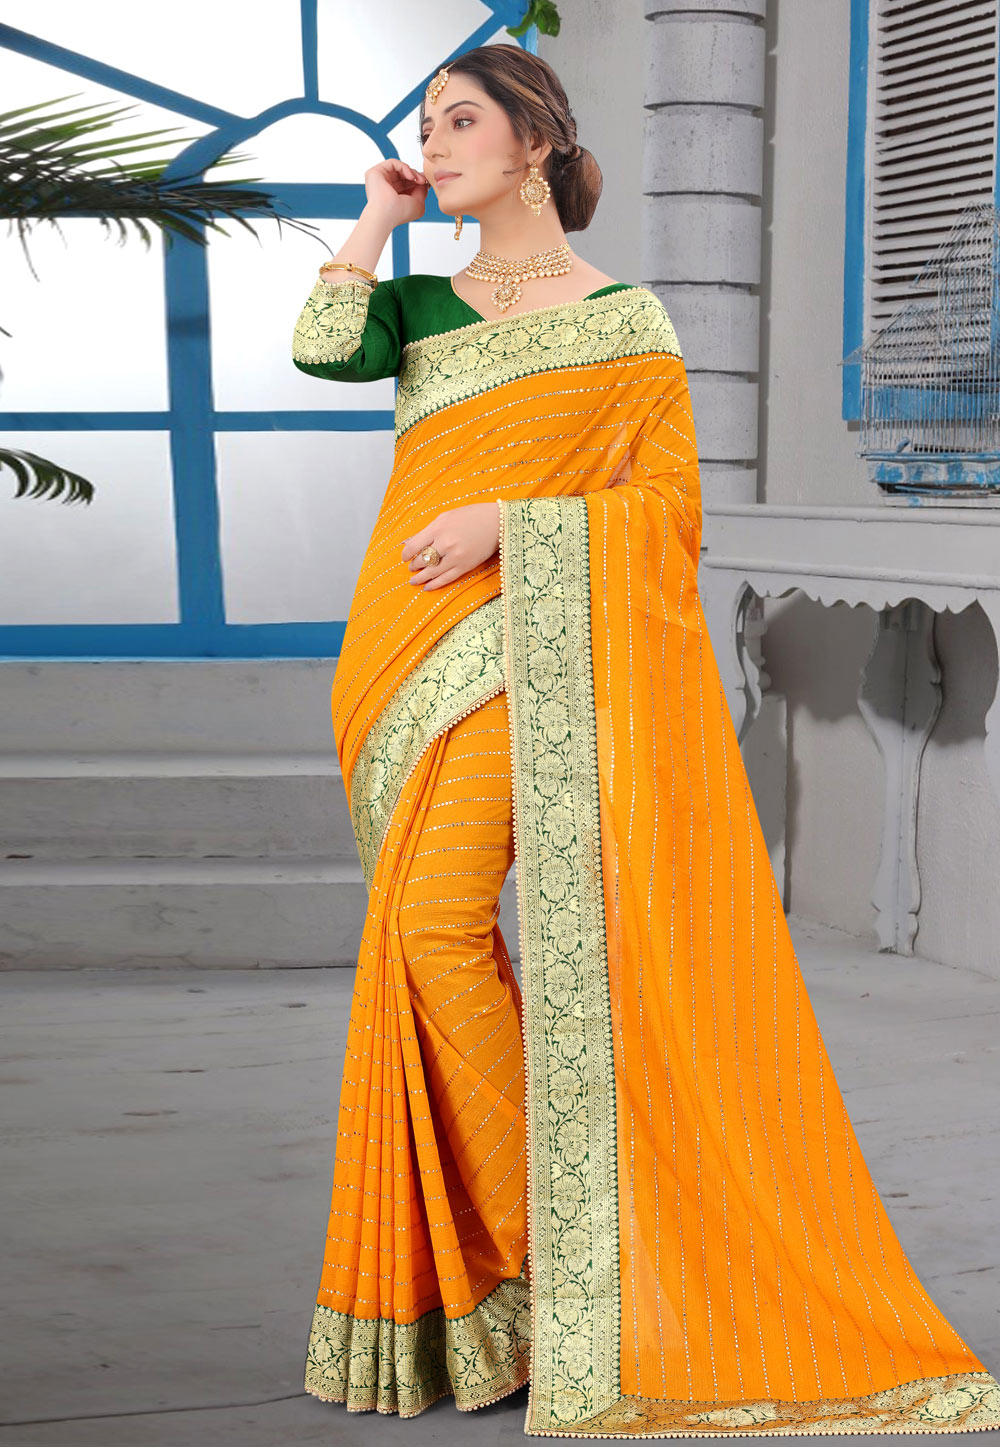 Shop the Hottest Grey Saree with Black Blouse Online Now